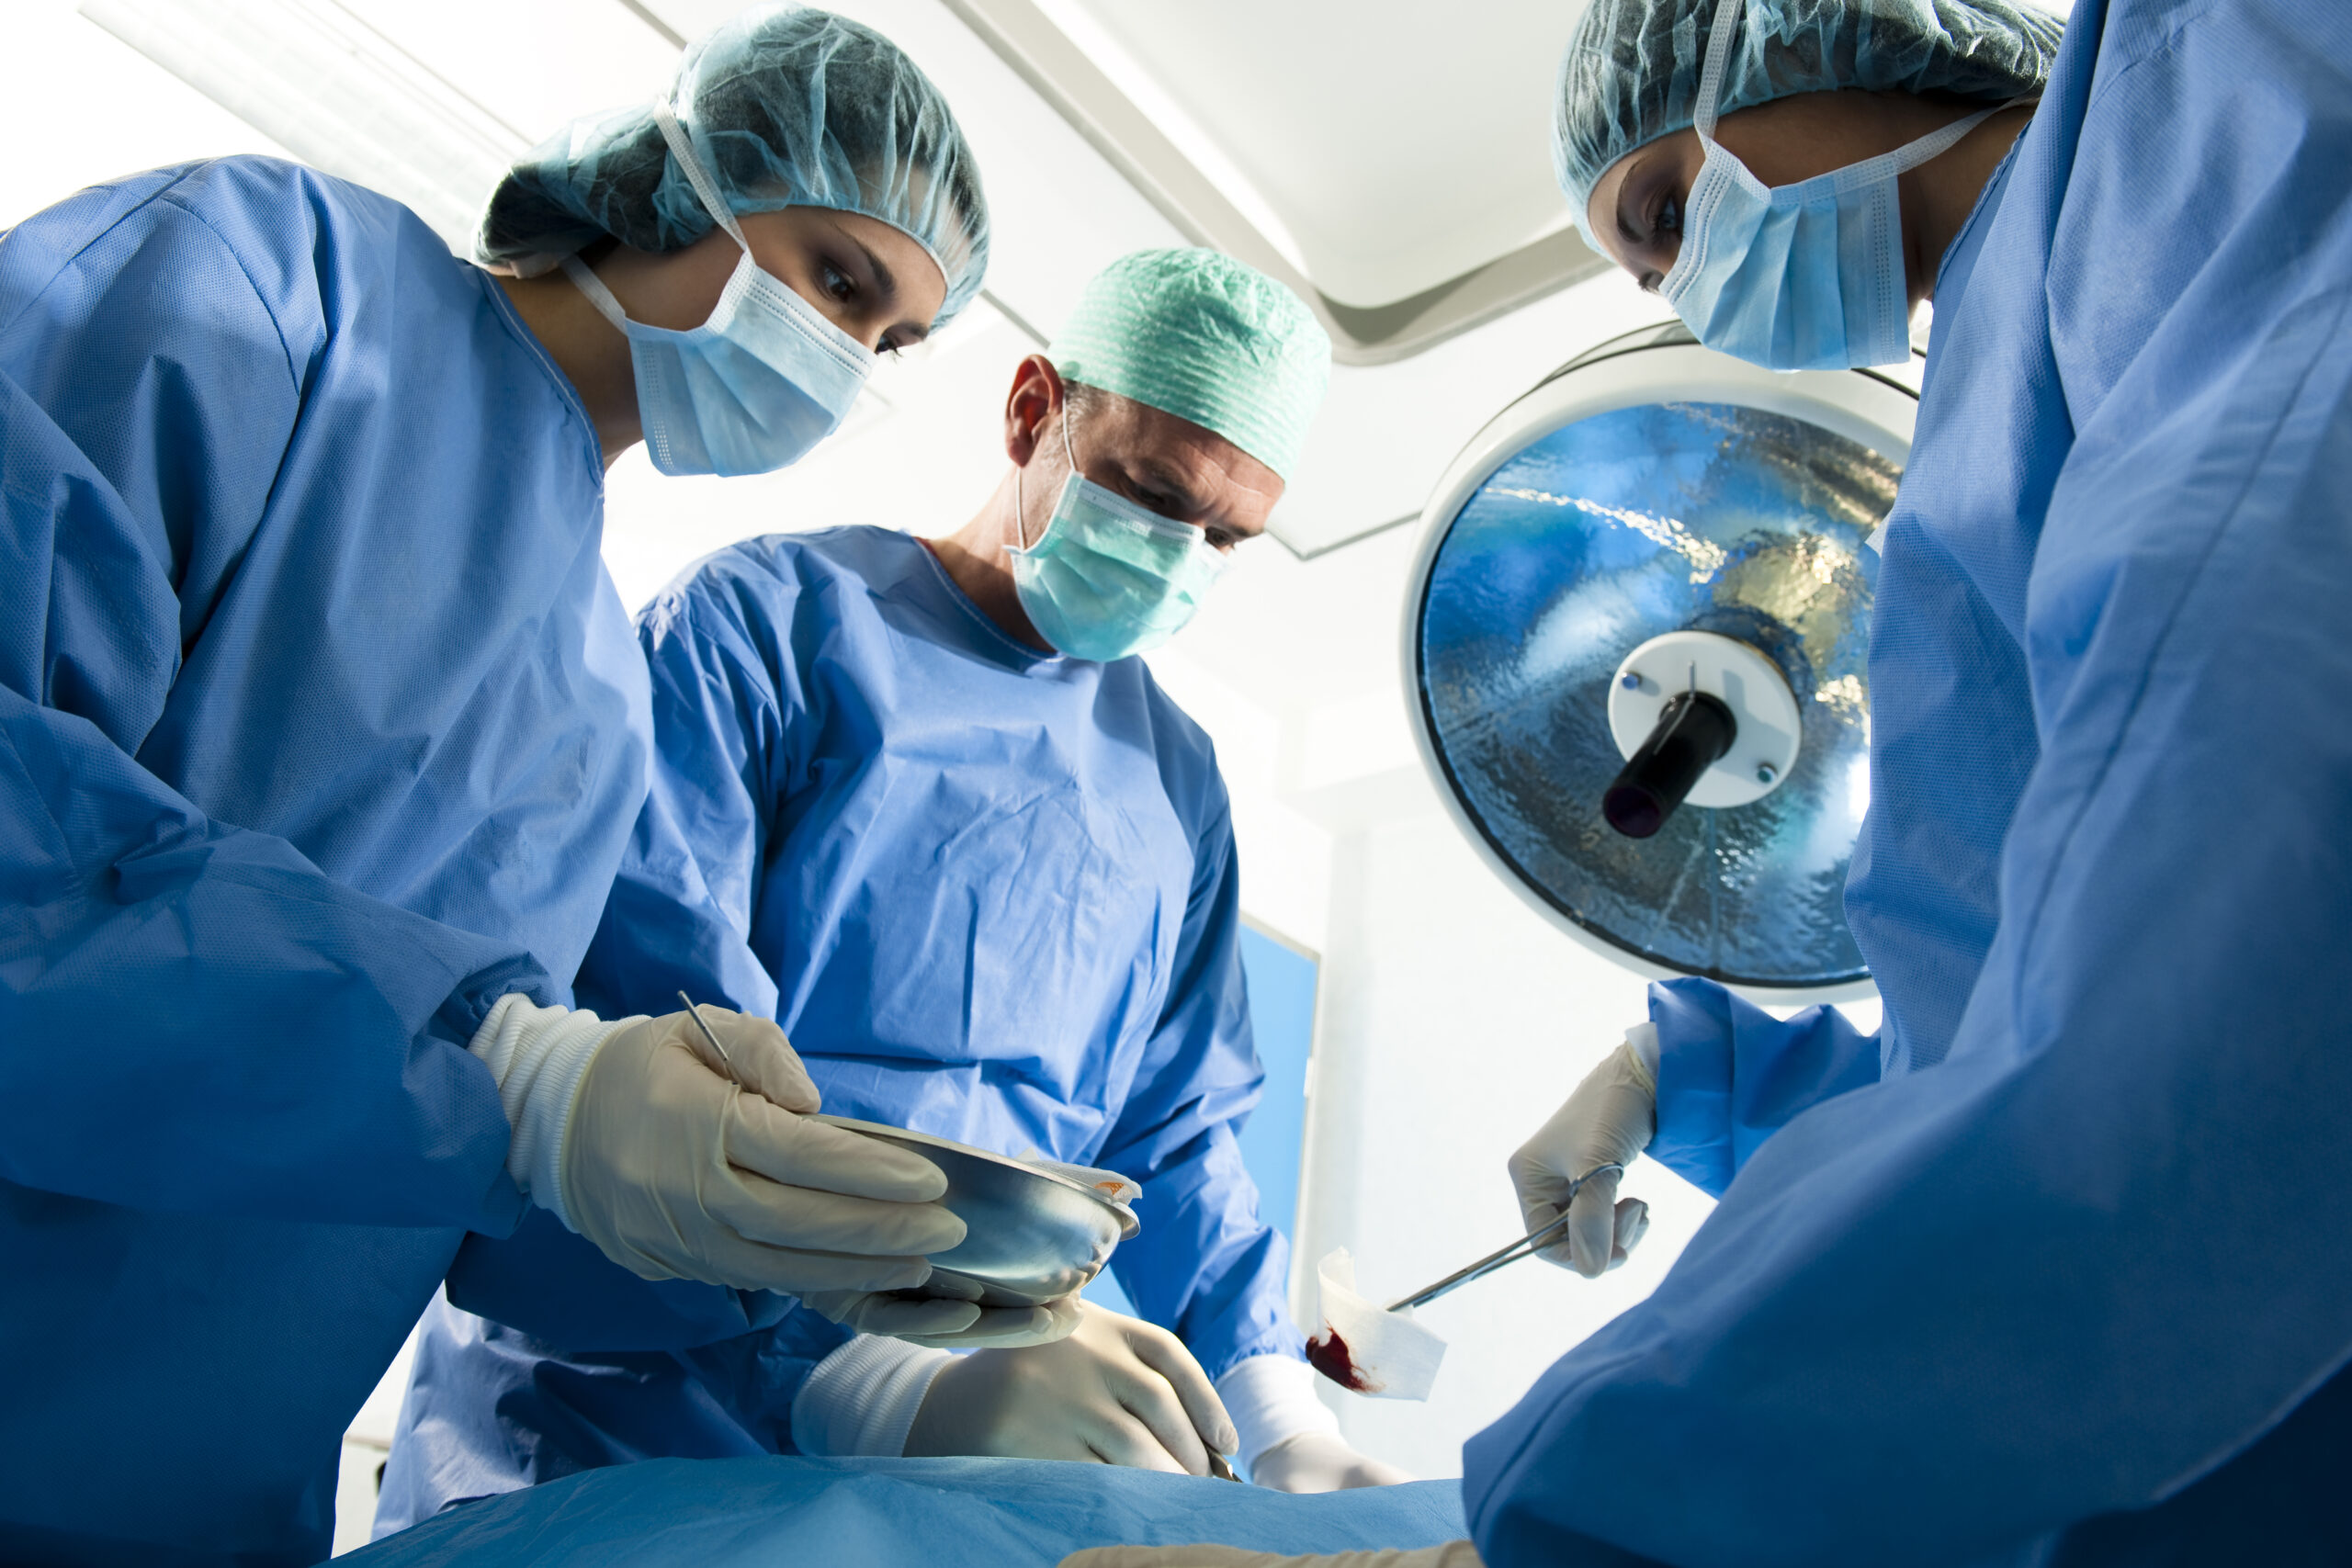 Orthopaedic Medical Group Surgery Center services